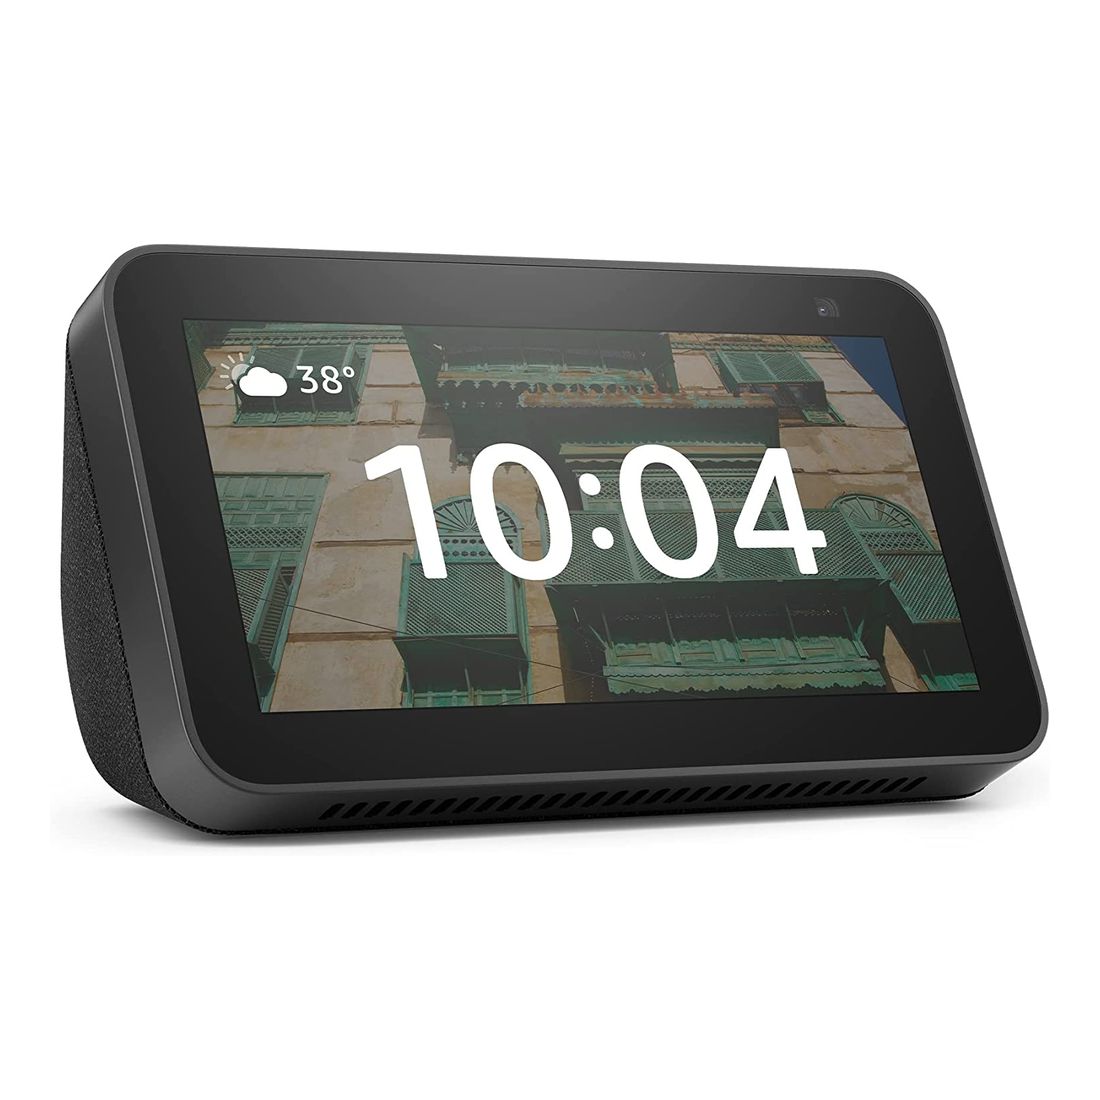 Amazon Echo Show 5 (2nd Gen) HD Smart Display with Alexa and 2 MP Camera - Charcoal